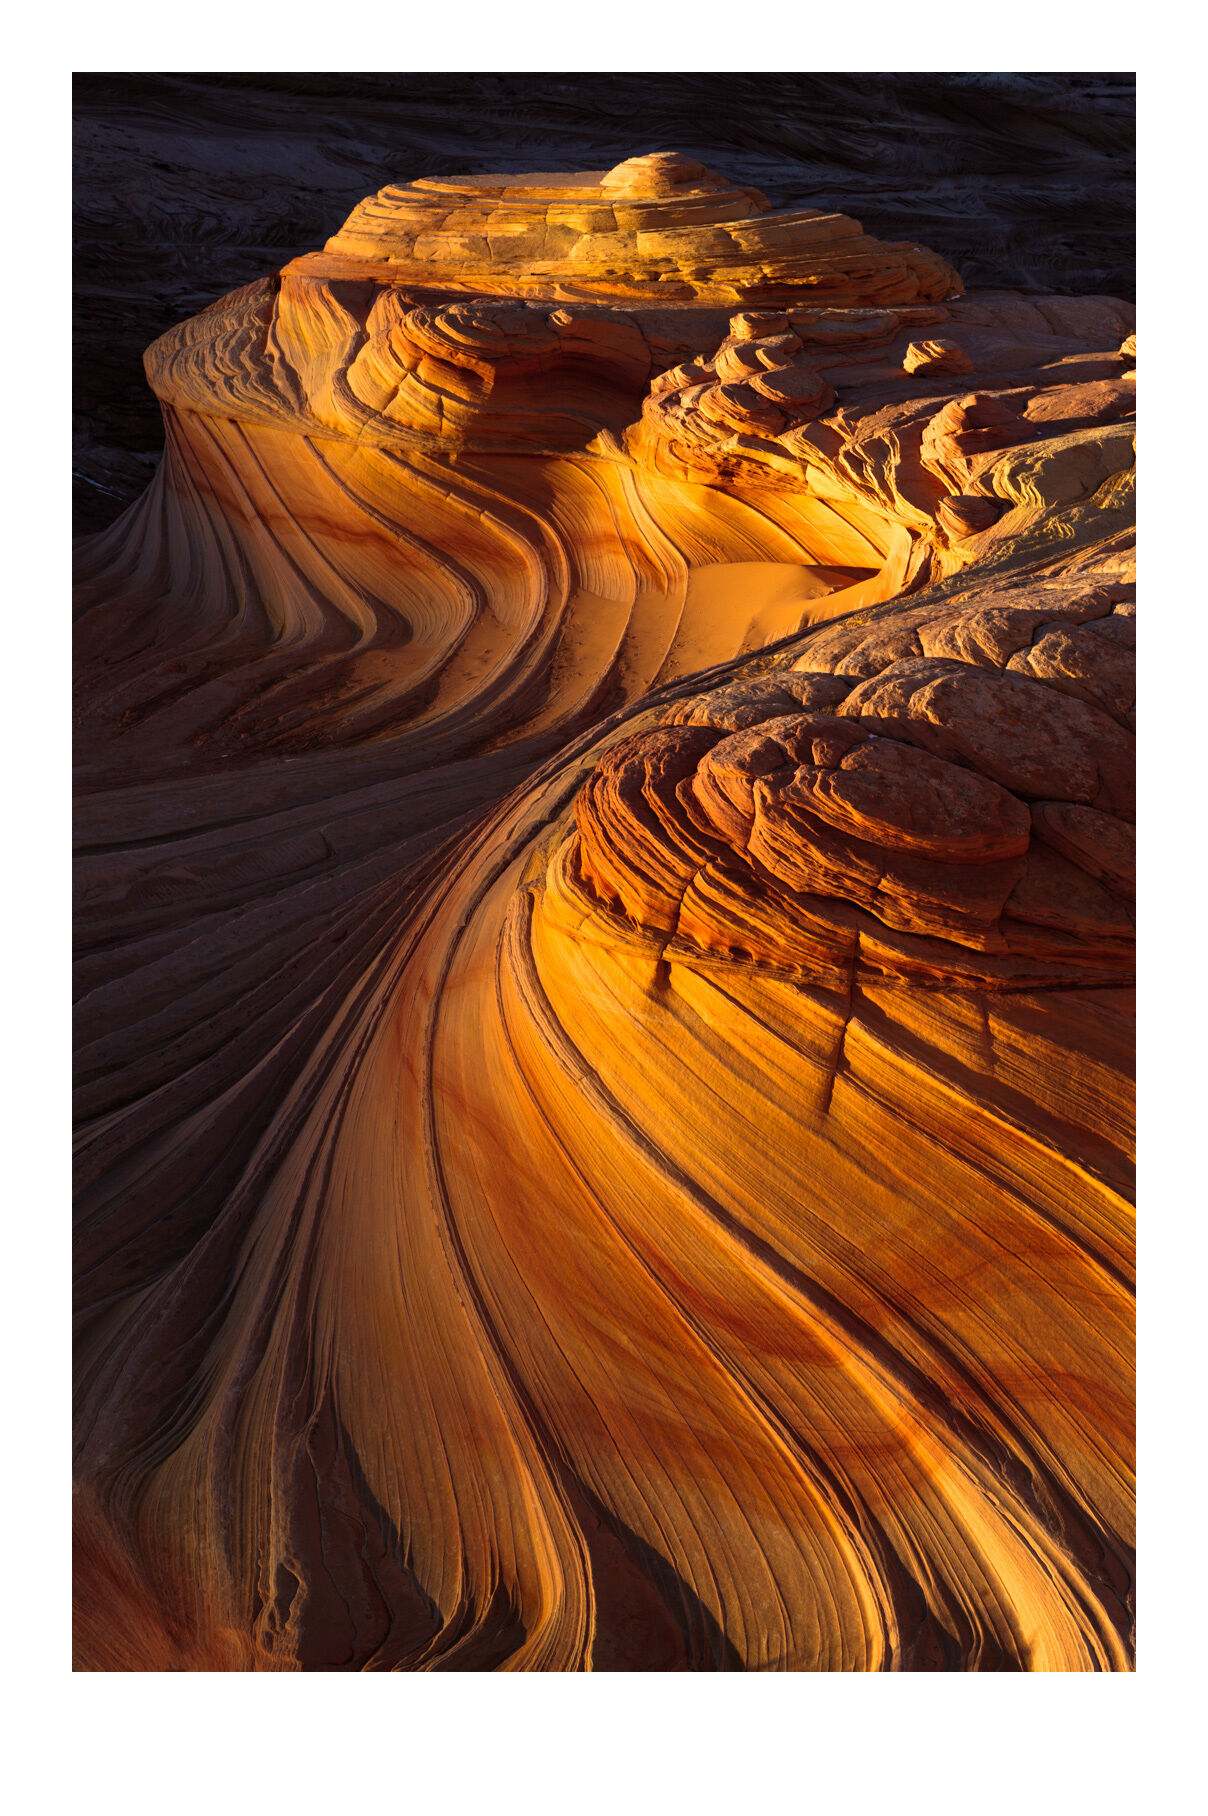 Waves of sadstone glowing in the rays of last light deep in the heart of the Paria/Vermillion Cliffs Wilderness, Arizona.